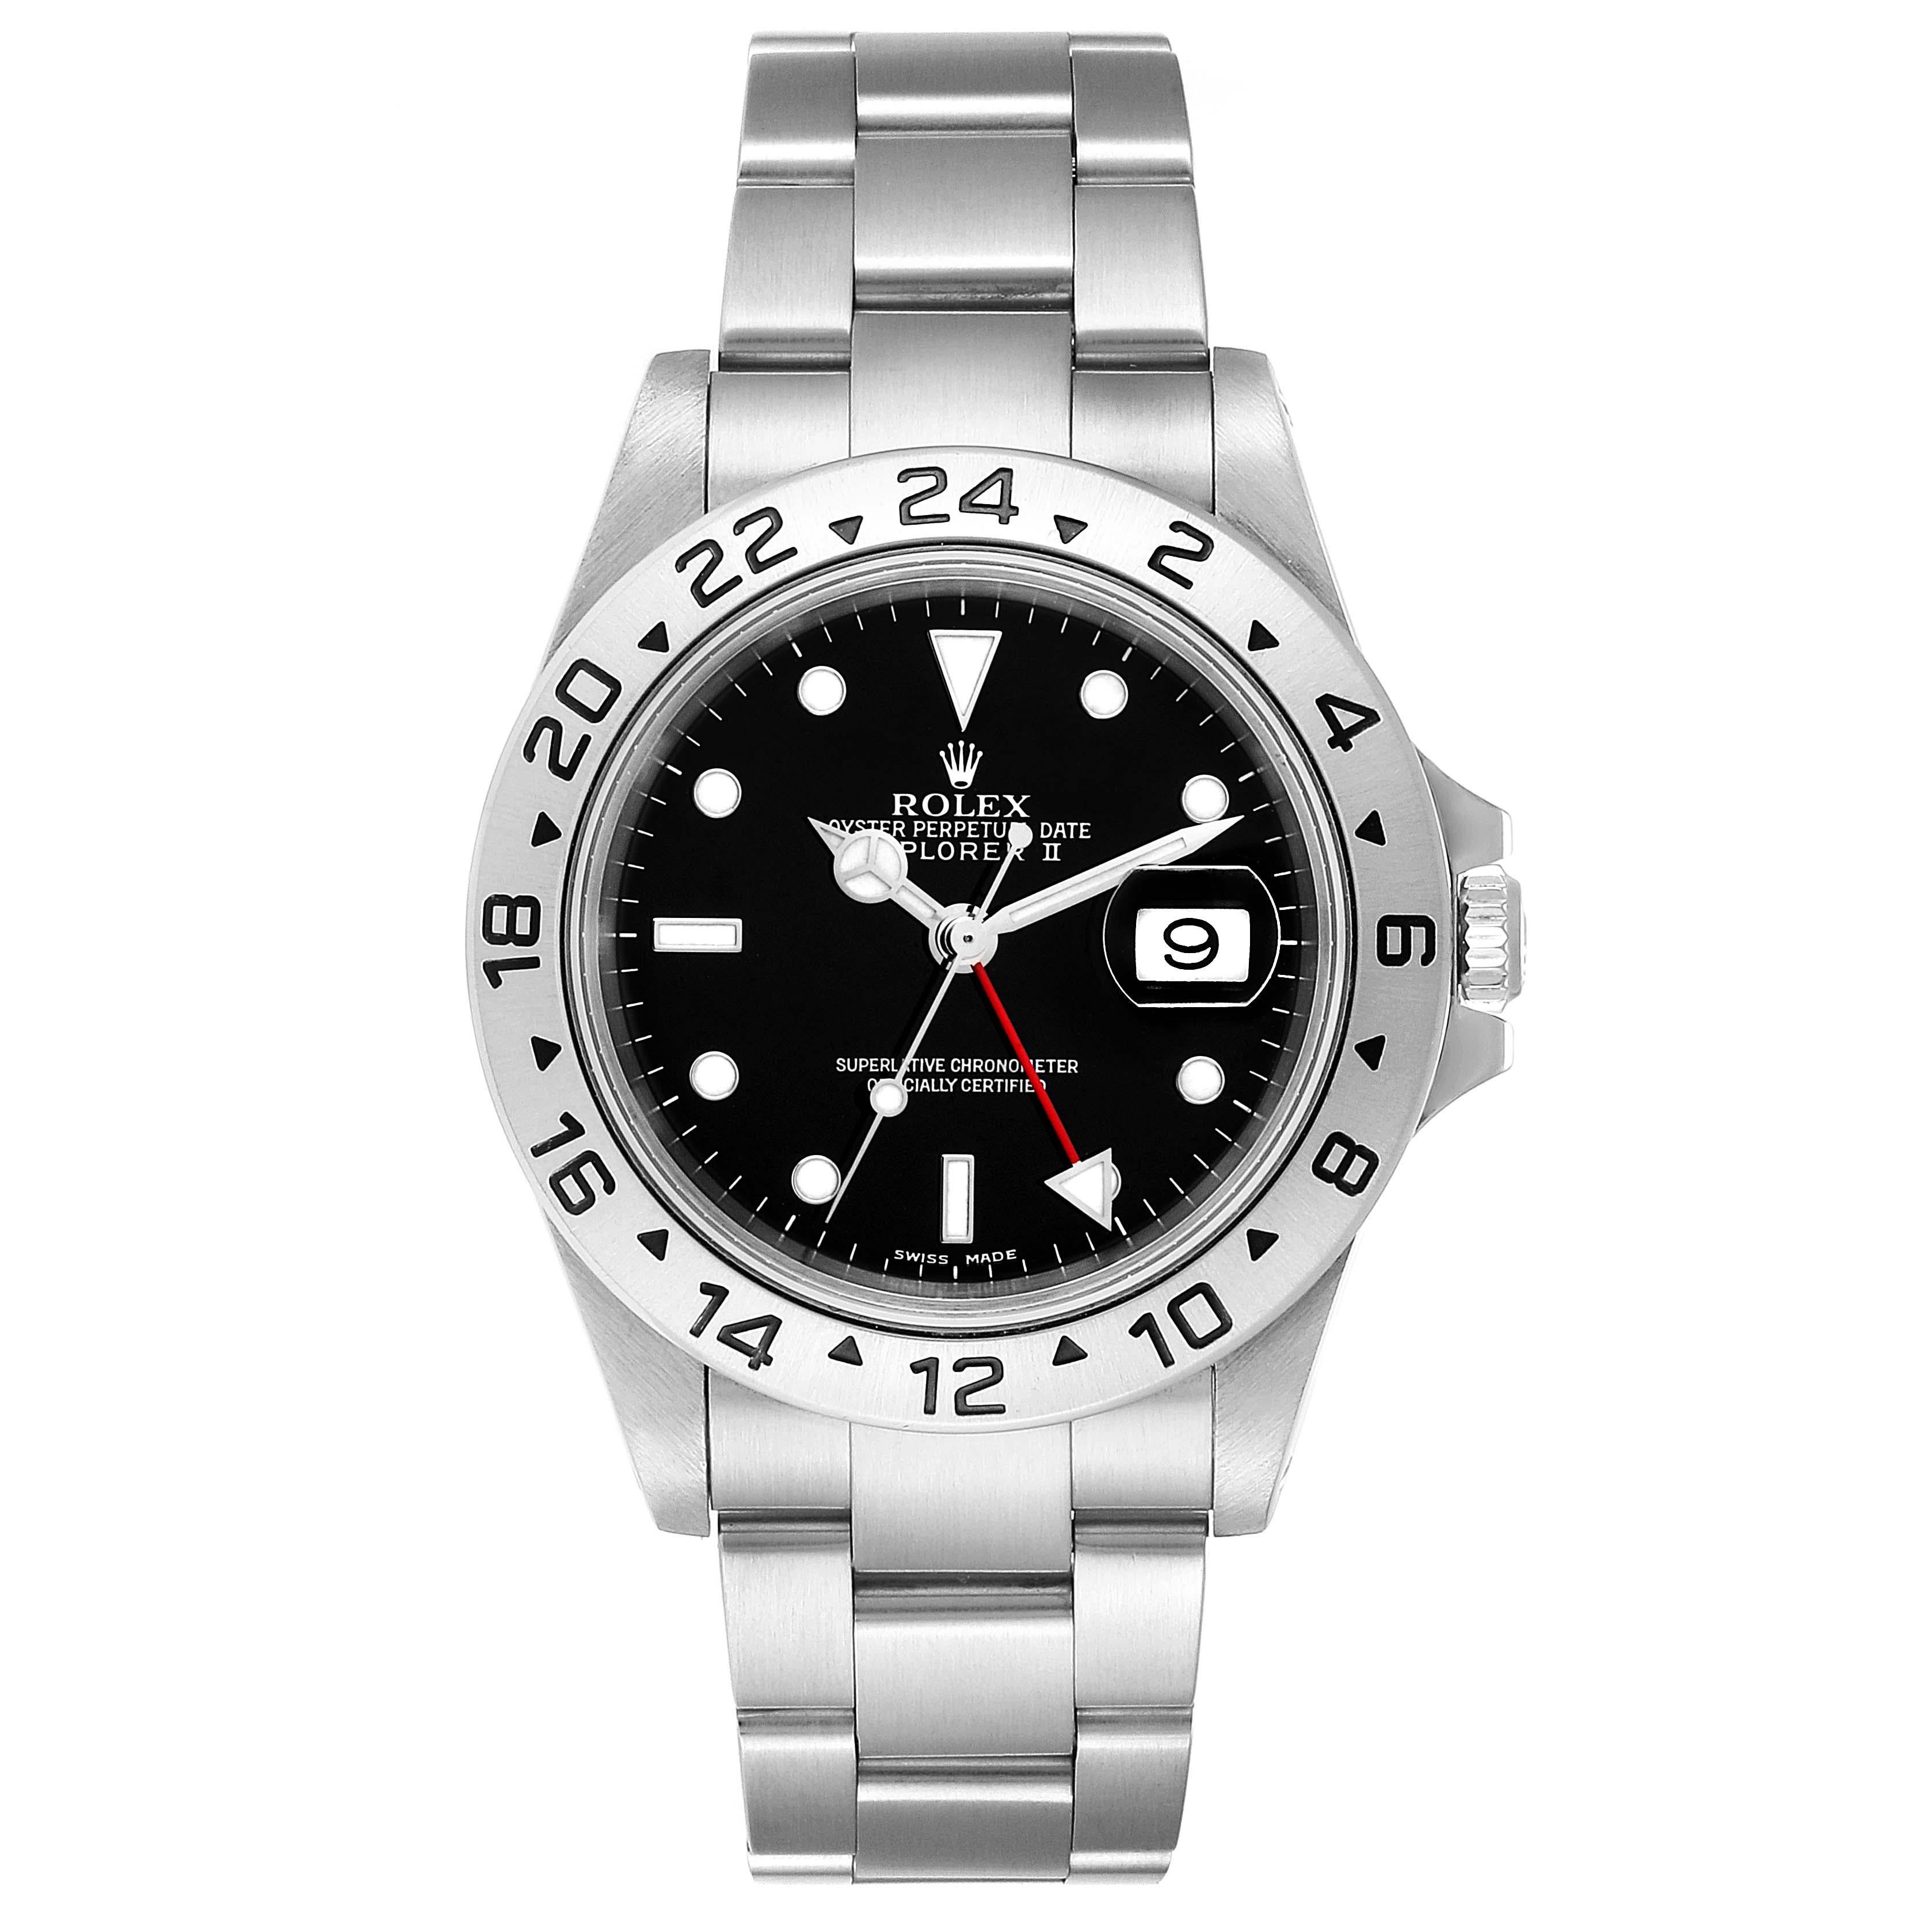 Rolex Explorer II Black Dial Automatic Steel Mens Watch 16570 Box Papers. Officially certified chronometer self-winding movement. Stainless steel case 40 mm in diameter. Rolex logo on a crown. Stainless steel bezel. Scratch resistant sapphire